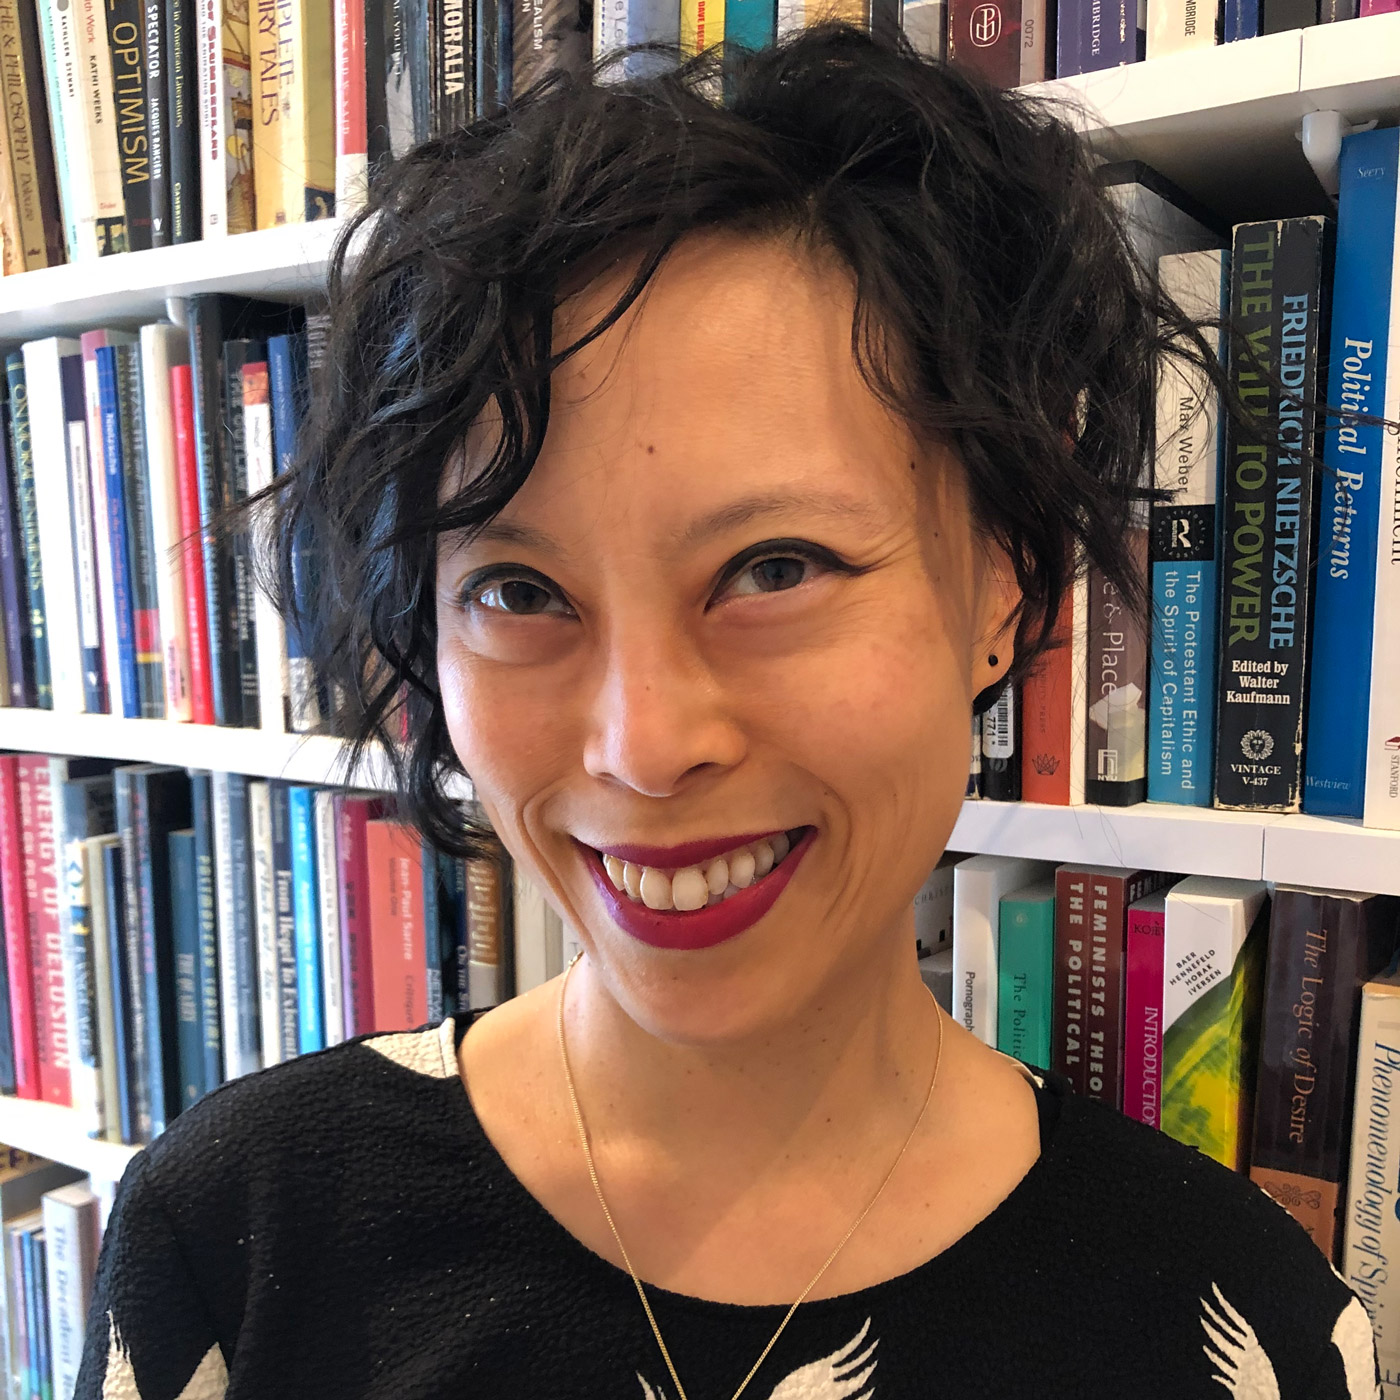 portrait of Sianne Ngai smiling and standing in front of a bookshelf